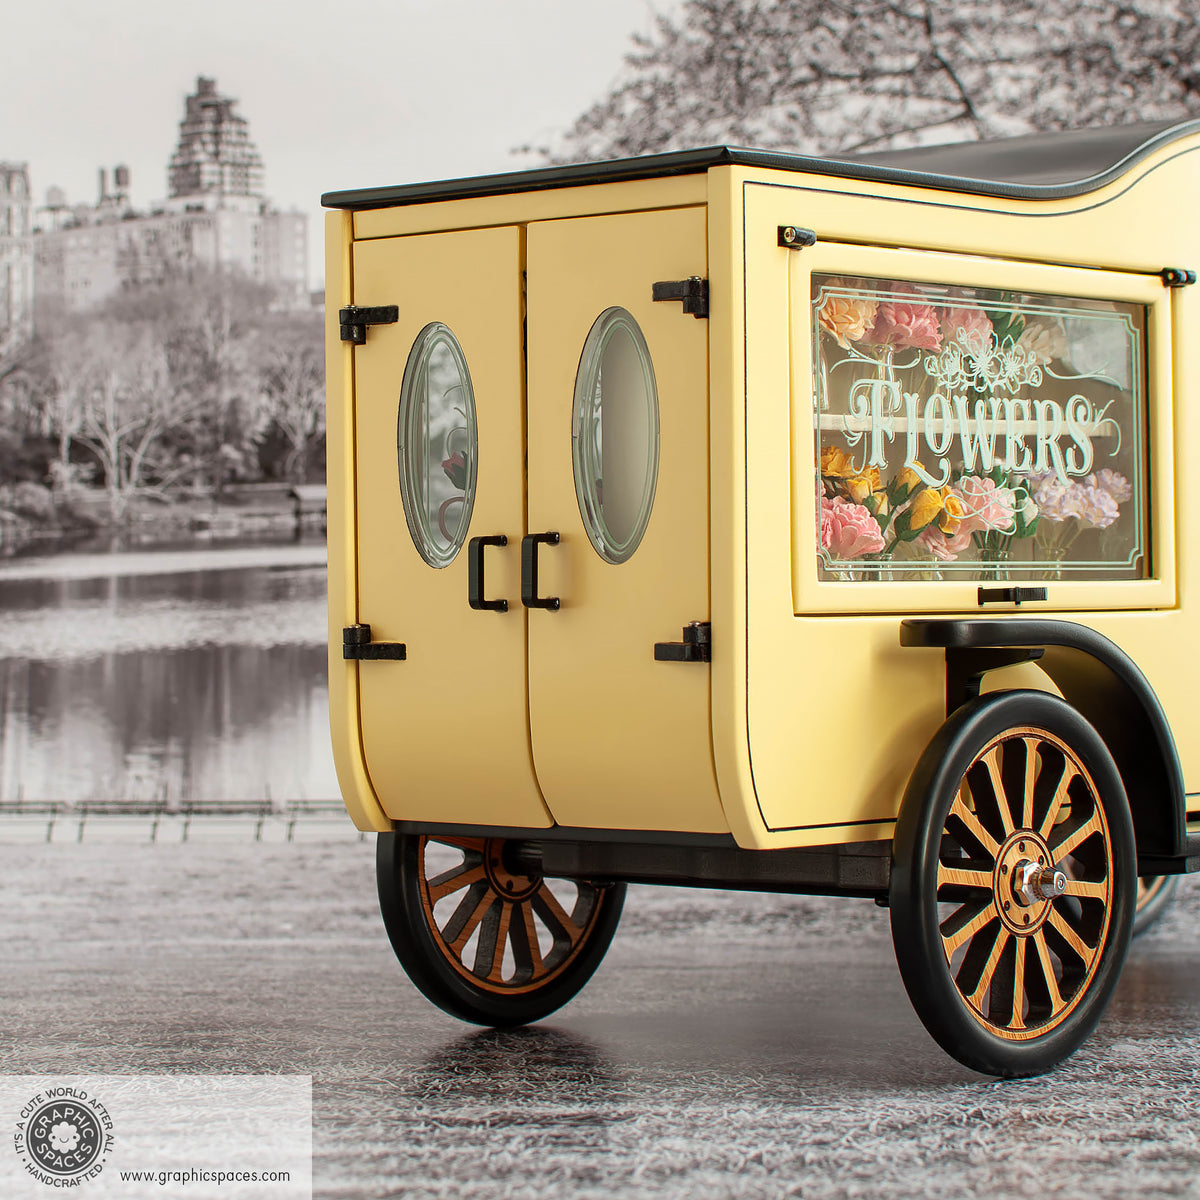 1:12 Scale Room Box Yellow Flower Shop Truck Model T C Cab. Detailed rear view with doors and display window closed.